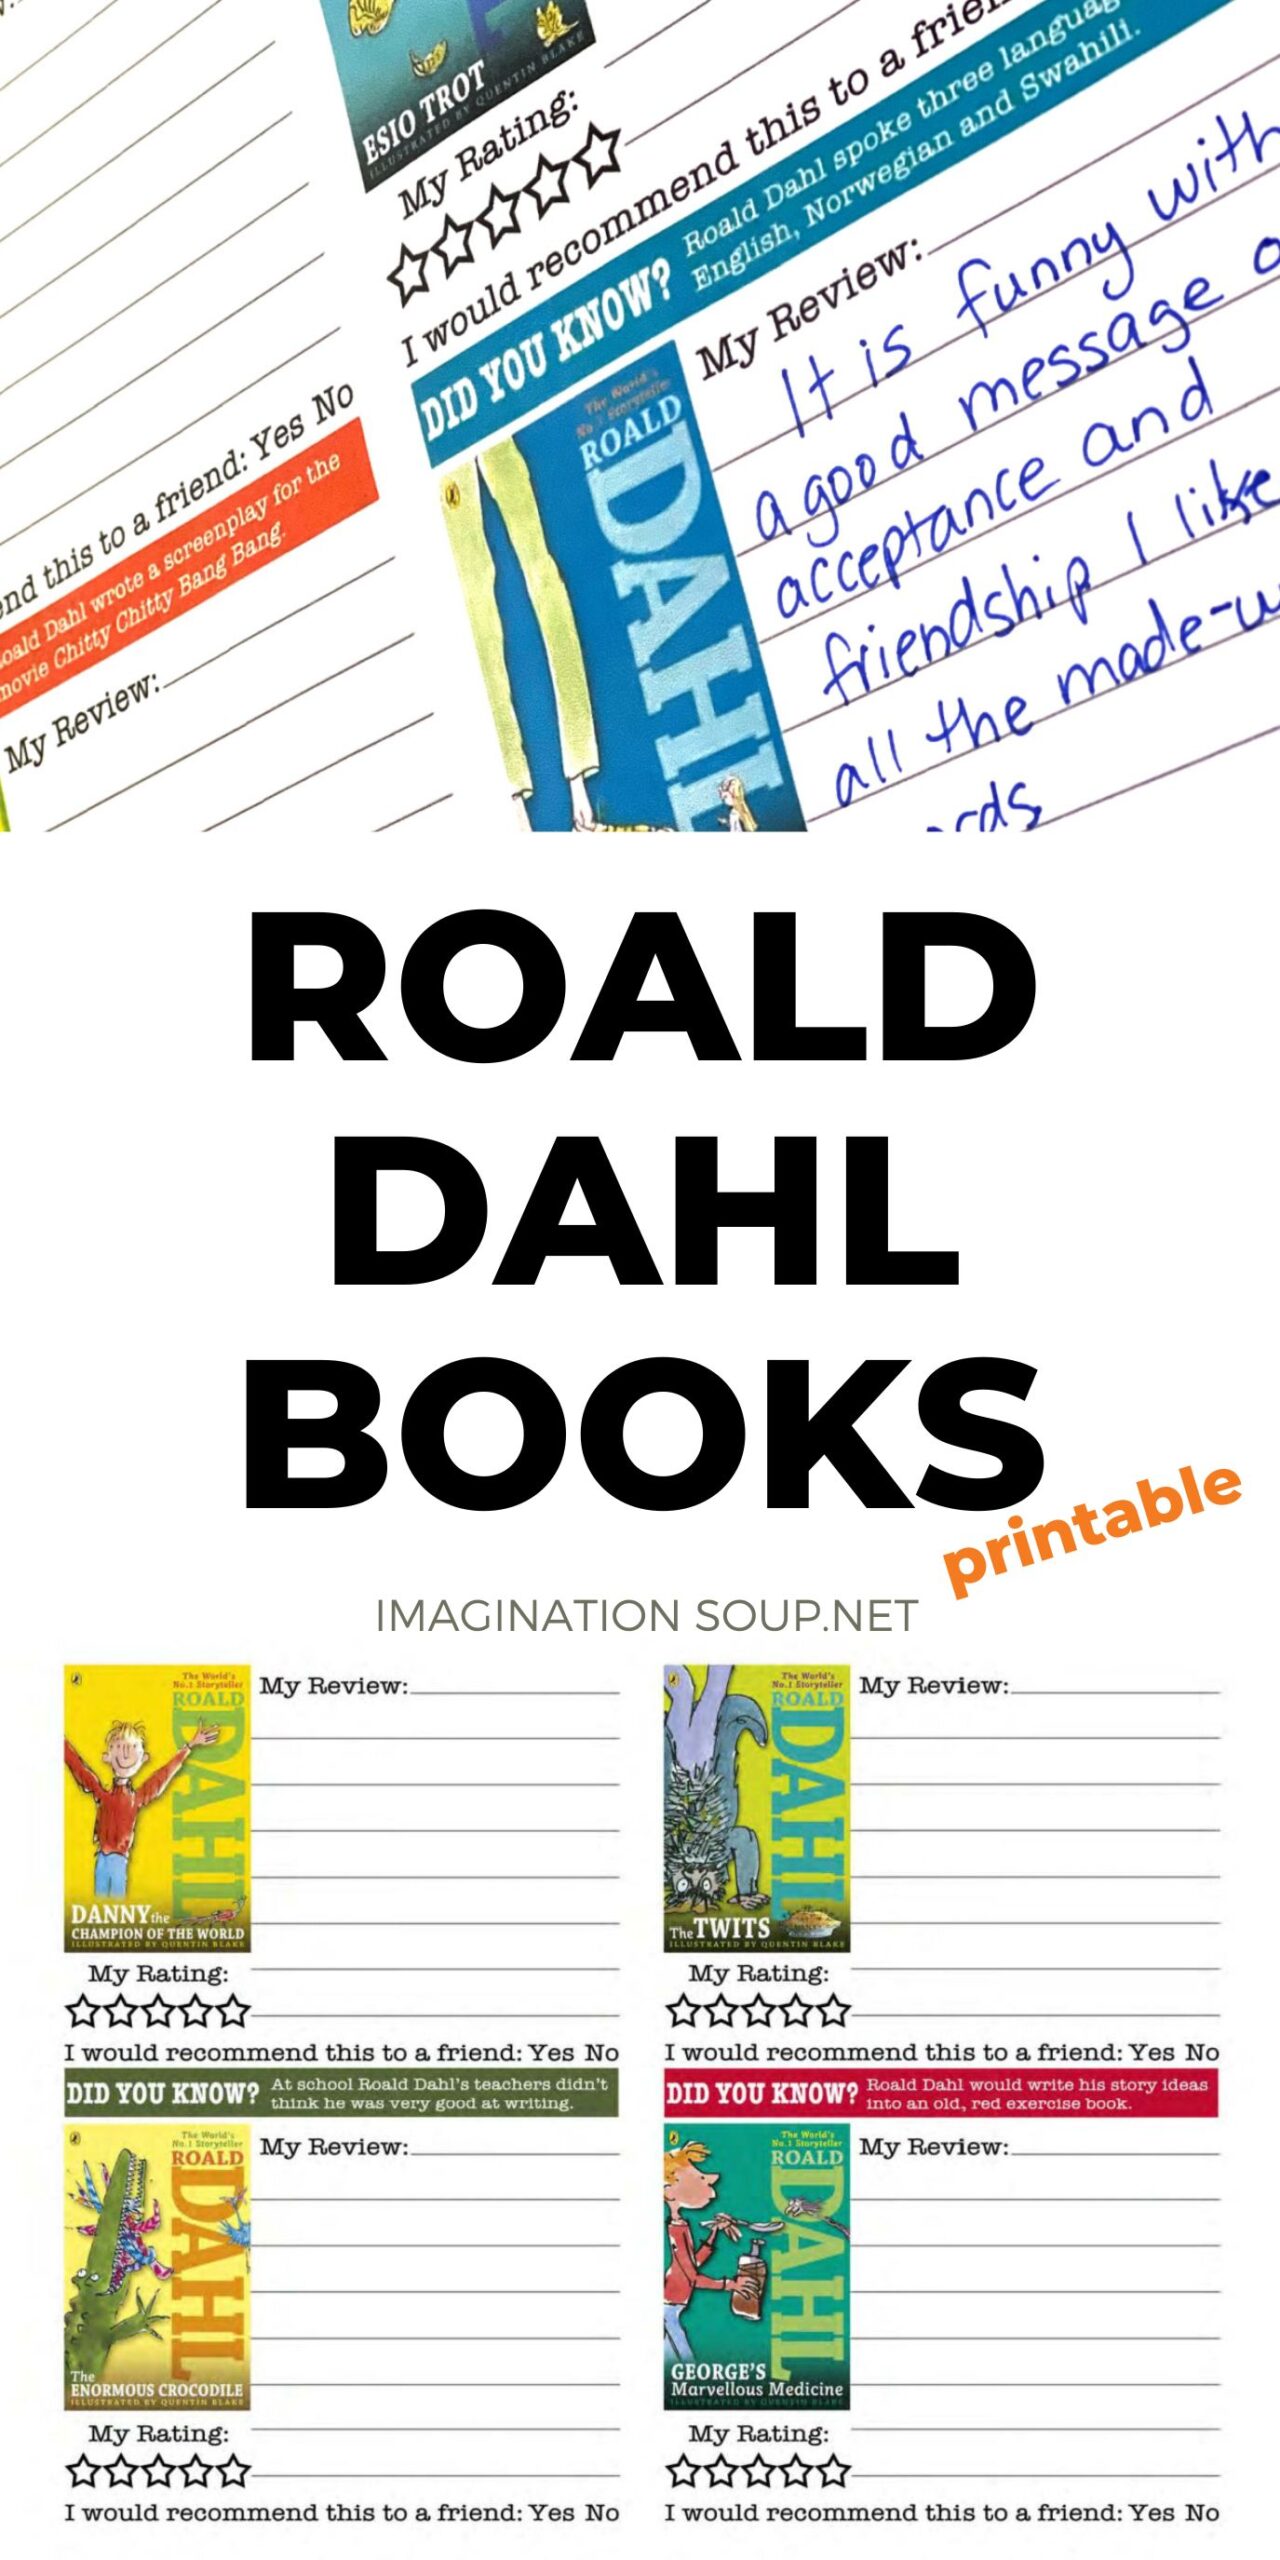 Have your children read all the Roald Dahl books? If you're tracking how many Roald Dahl books you've read, download this free printable booklet so you can keep track of all of the books, your reviews, and the ratings. This printable booklet gives you fun facts, space for your book reviews, a place to put how many stars you give each book, as well as a chance to say if you'd recommend it to a friend.